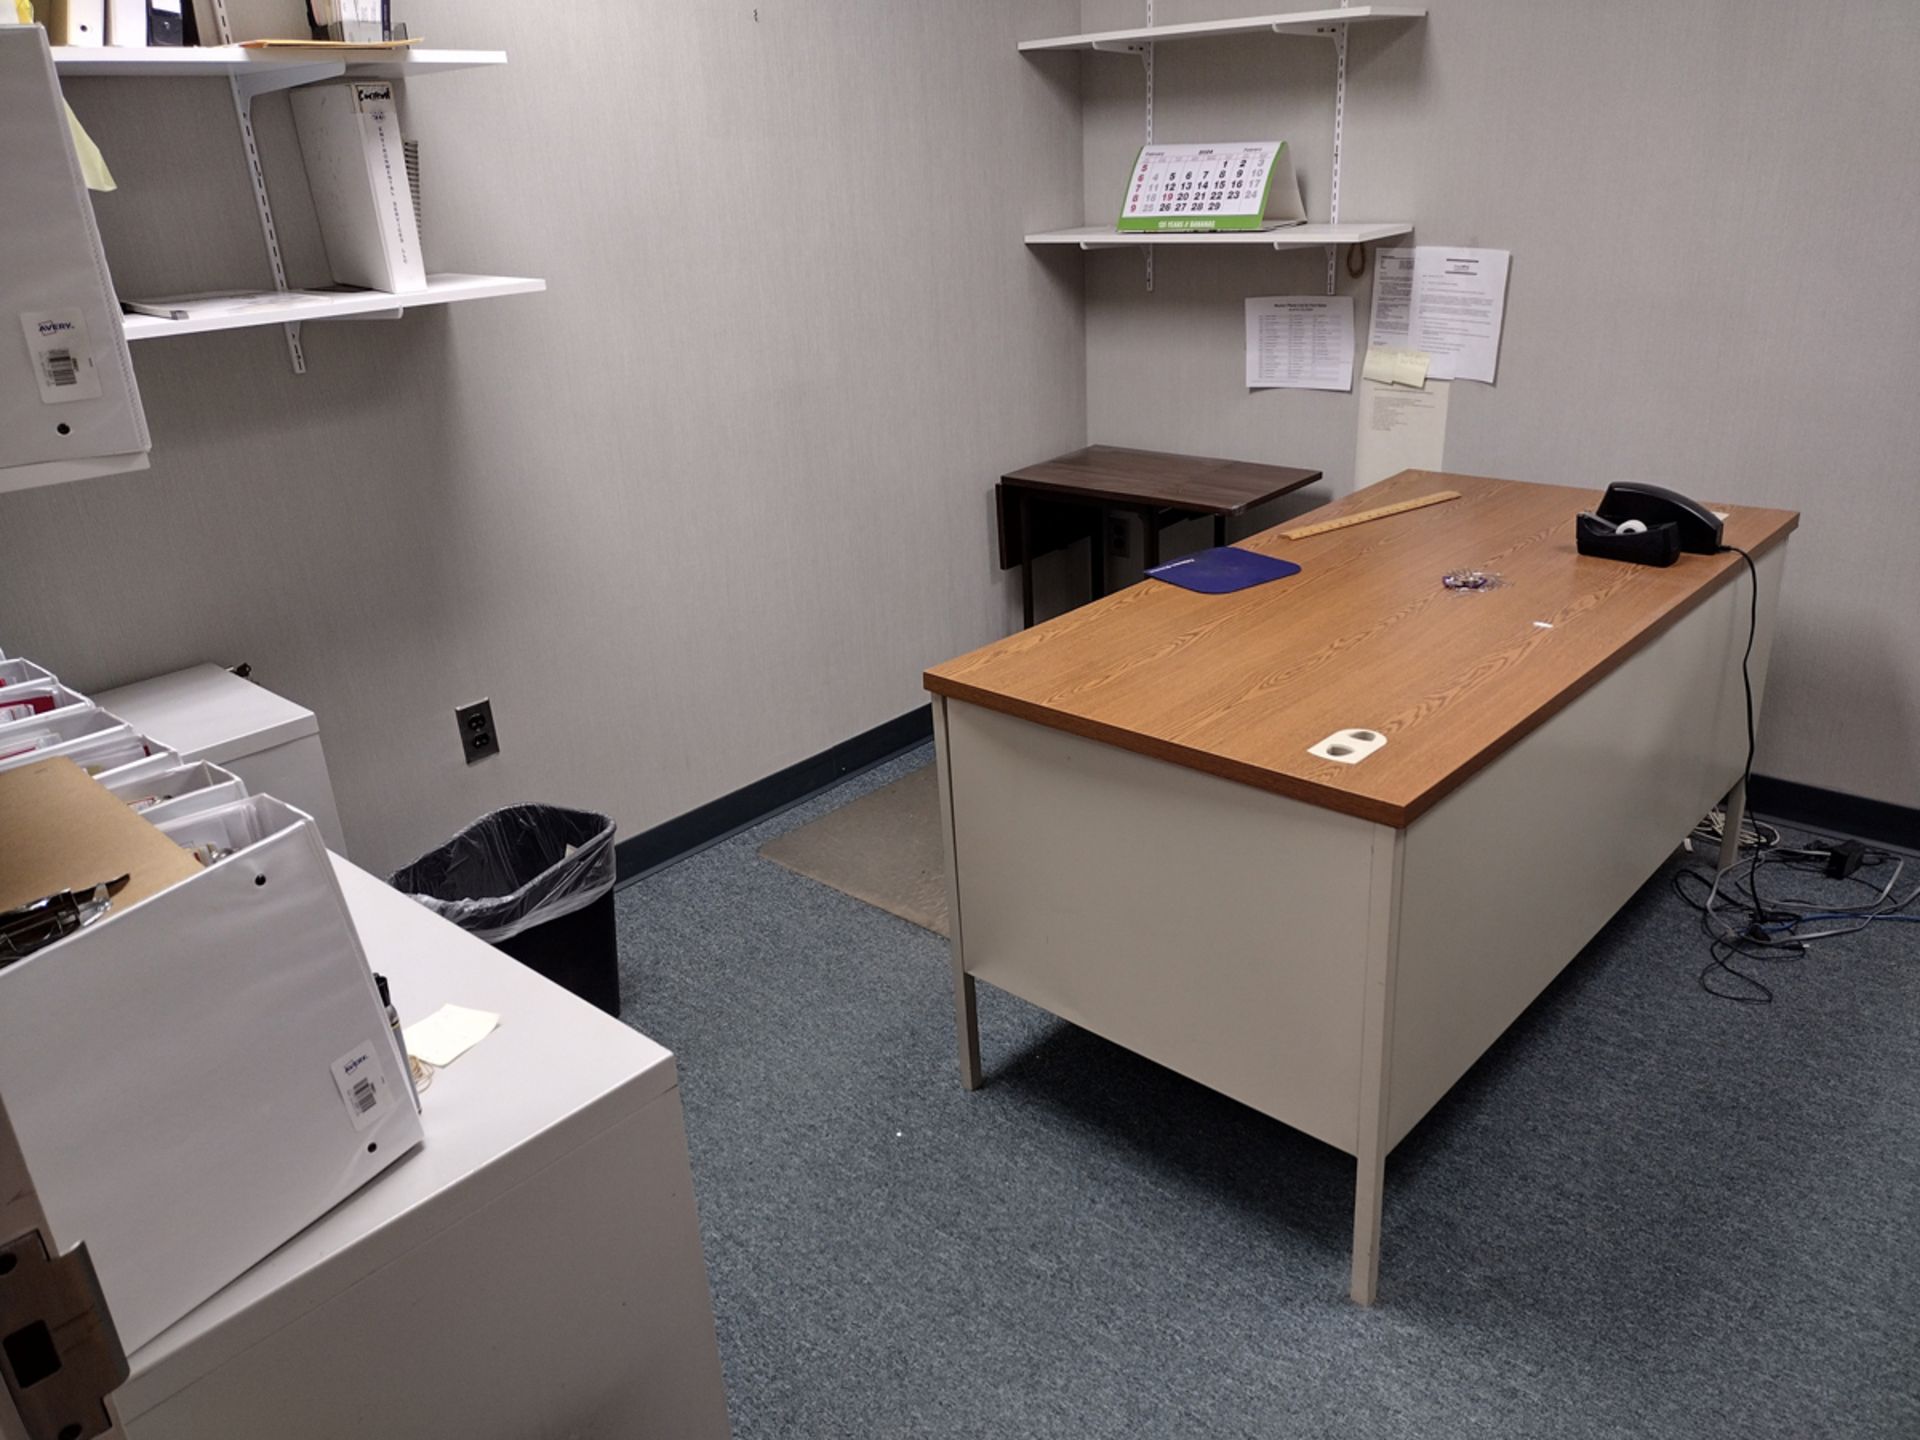 Group of Office Furniture Throughout Rooms - Image 17 of 17